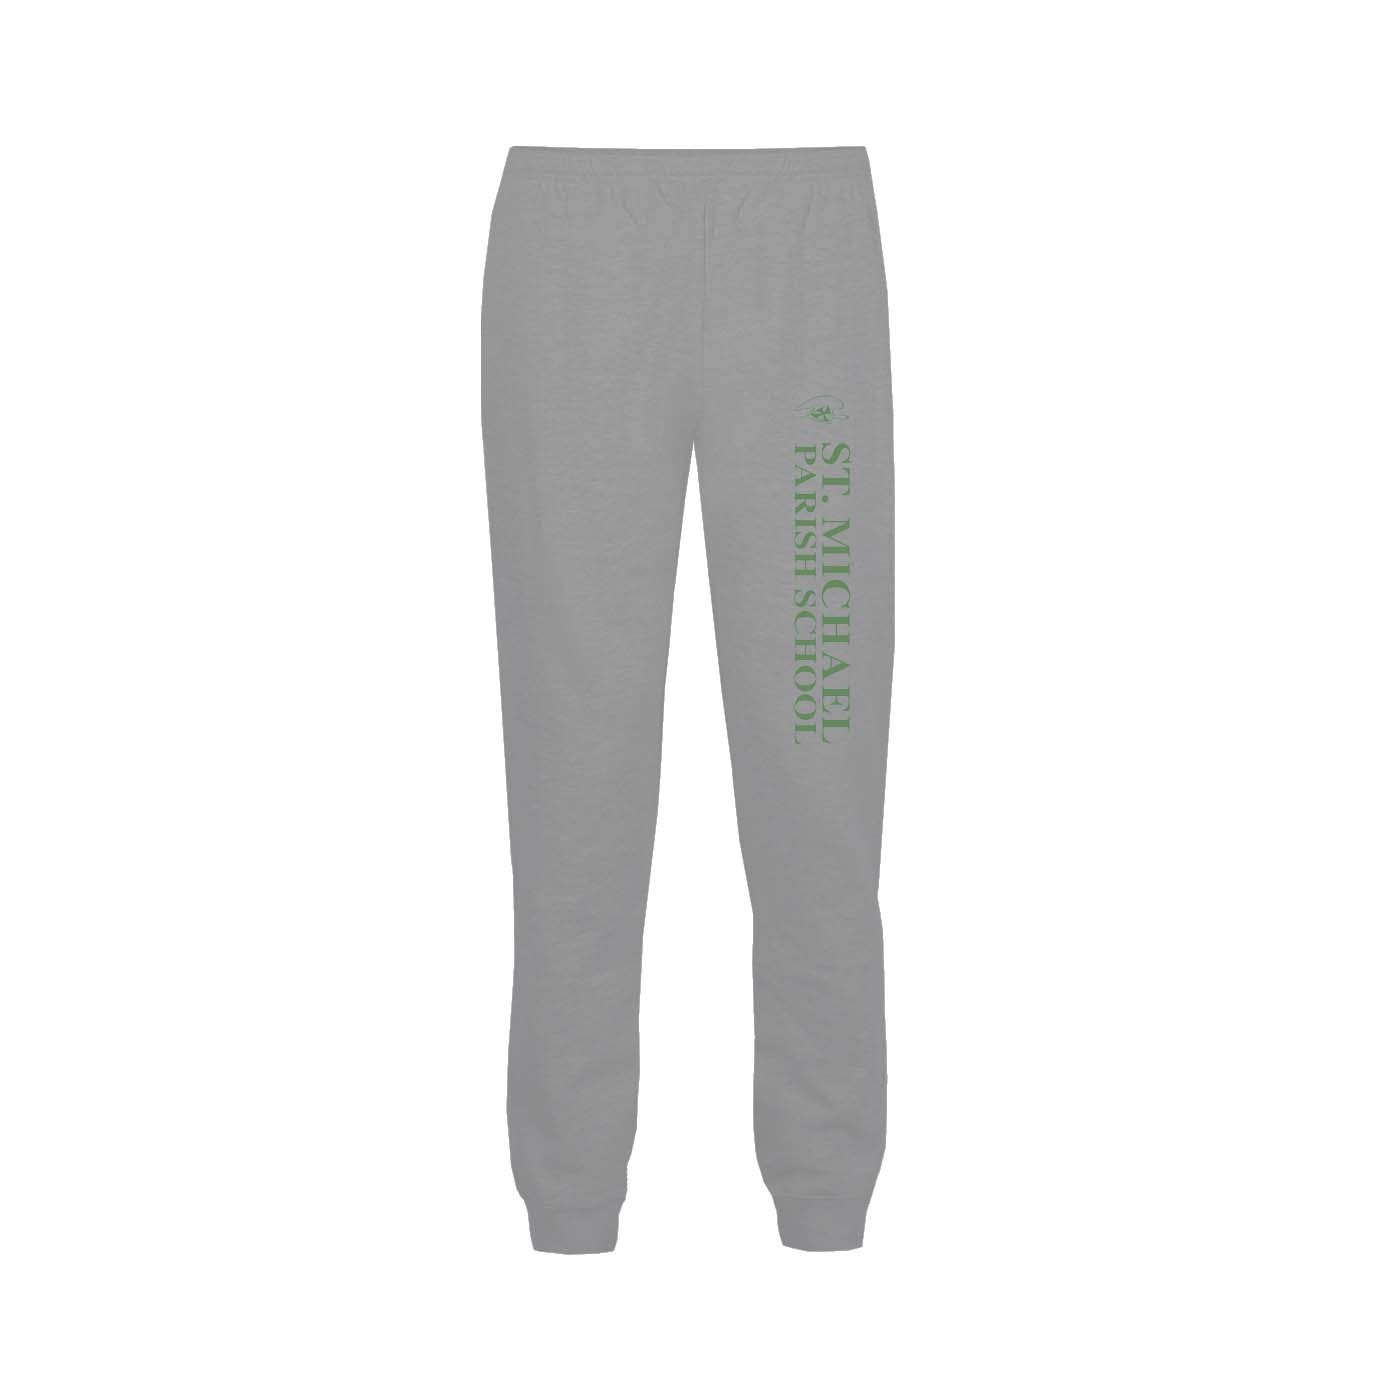 SMSU Spirit Performance Joggers w/ Green Logo #21- Please Allow 3-4 Weeks for Delivery